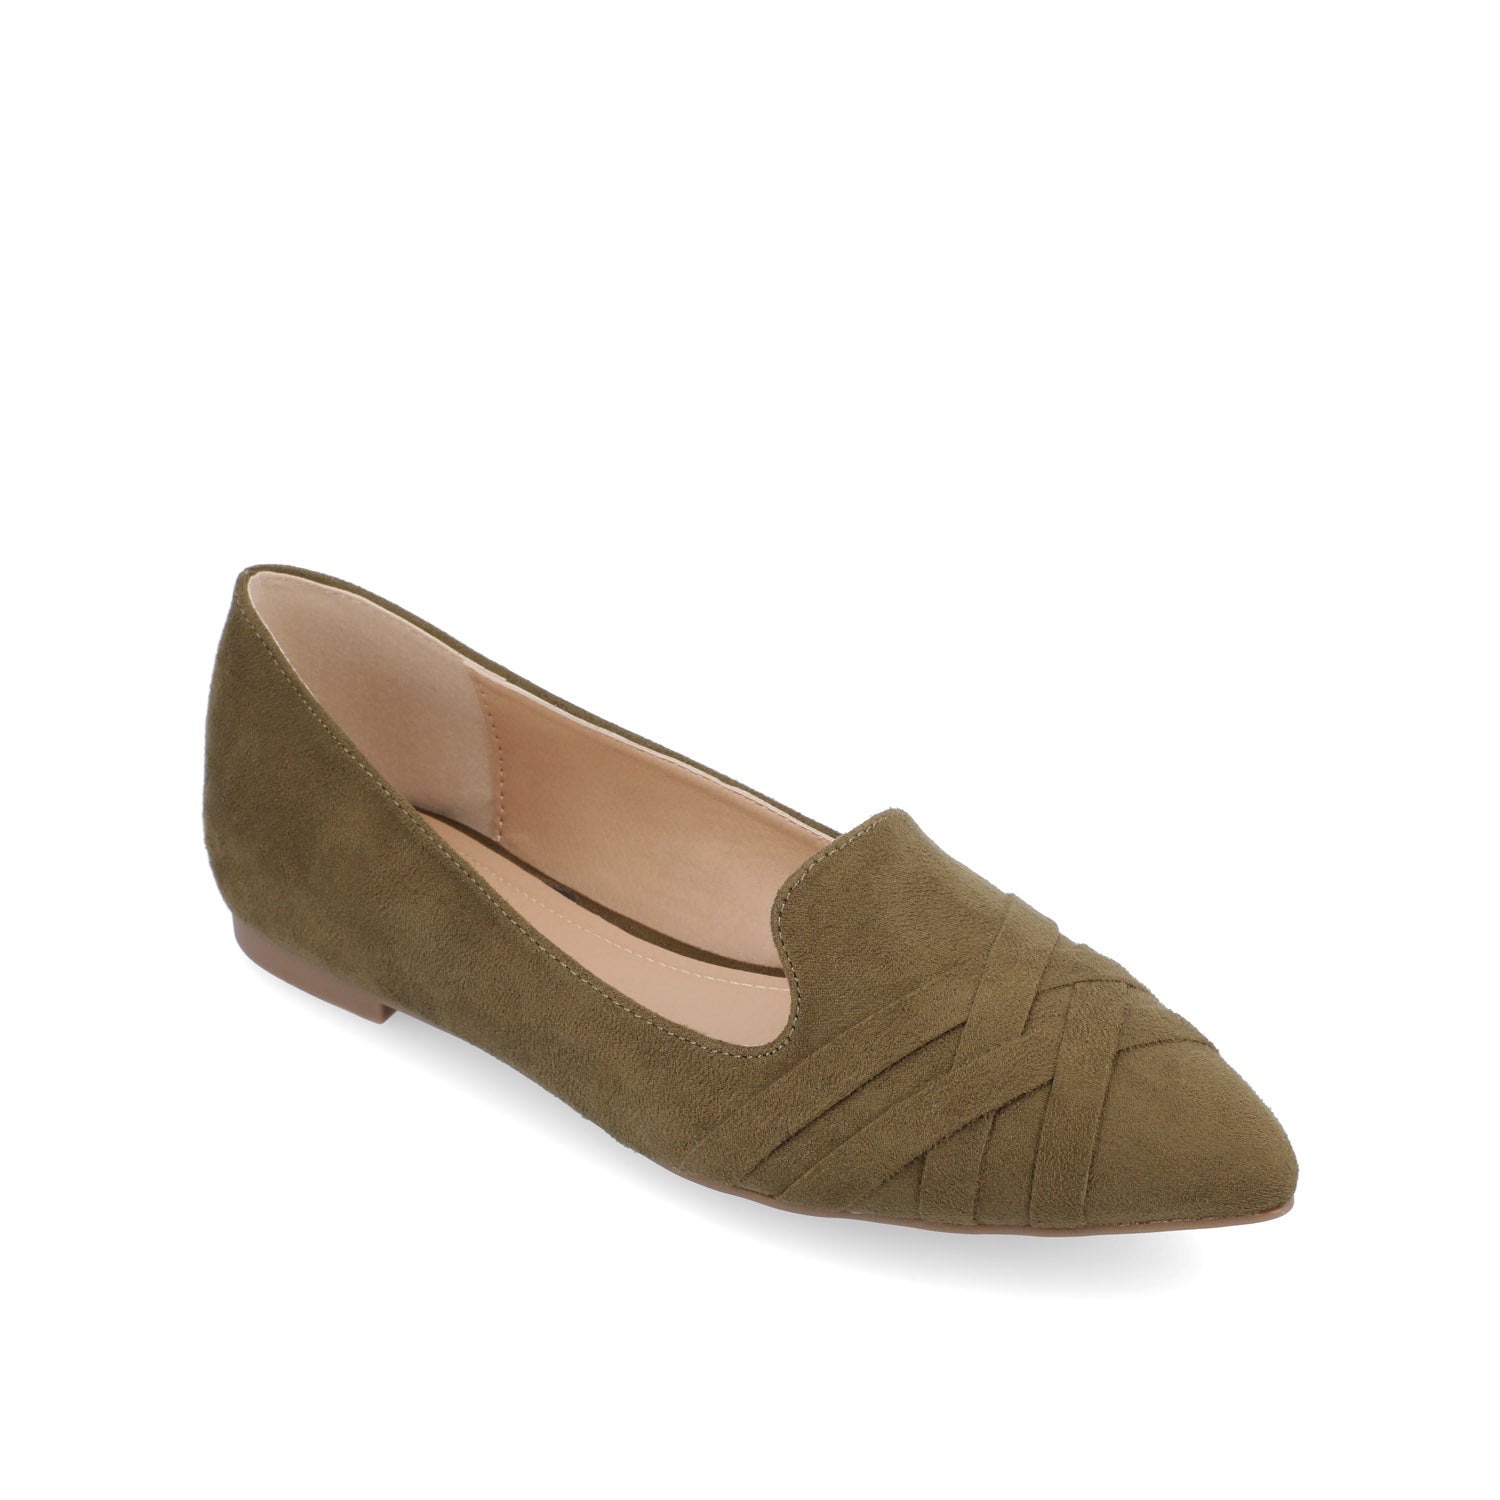 MINDEE LOAFER FLATS IN FAUX SUEDE